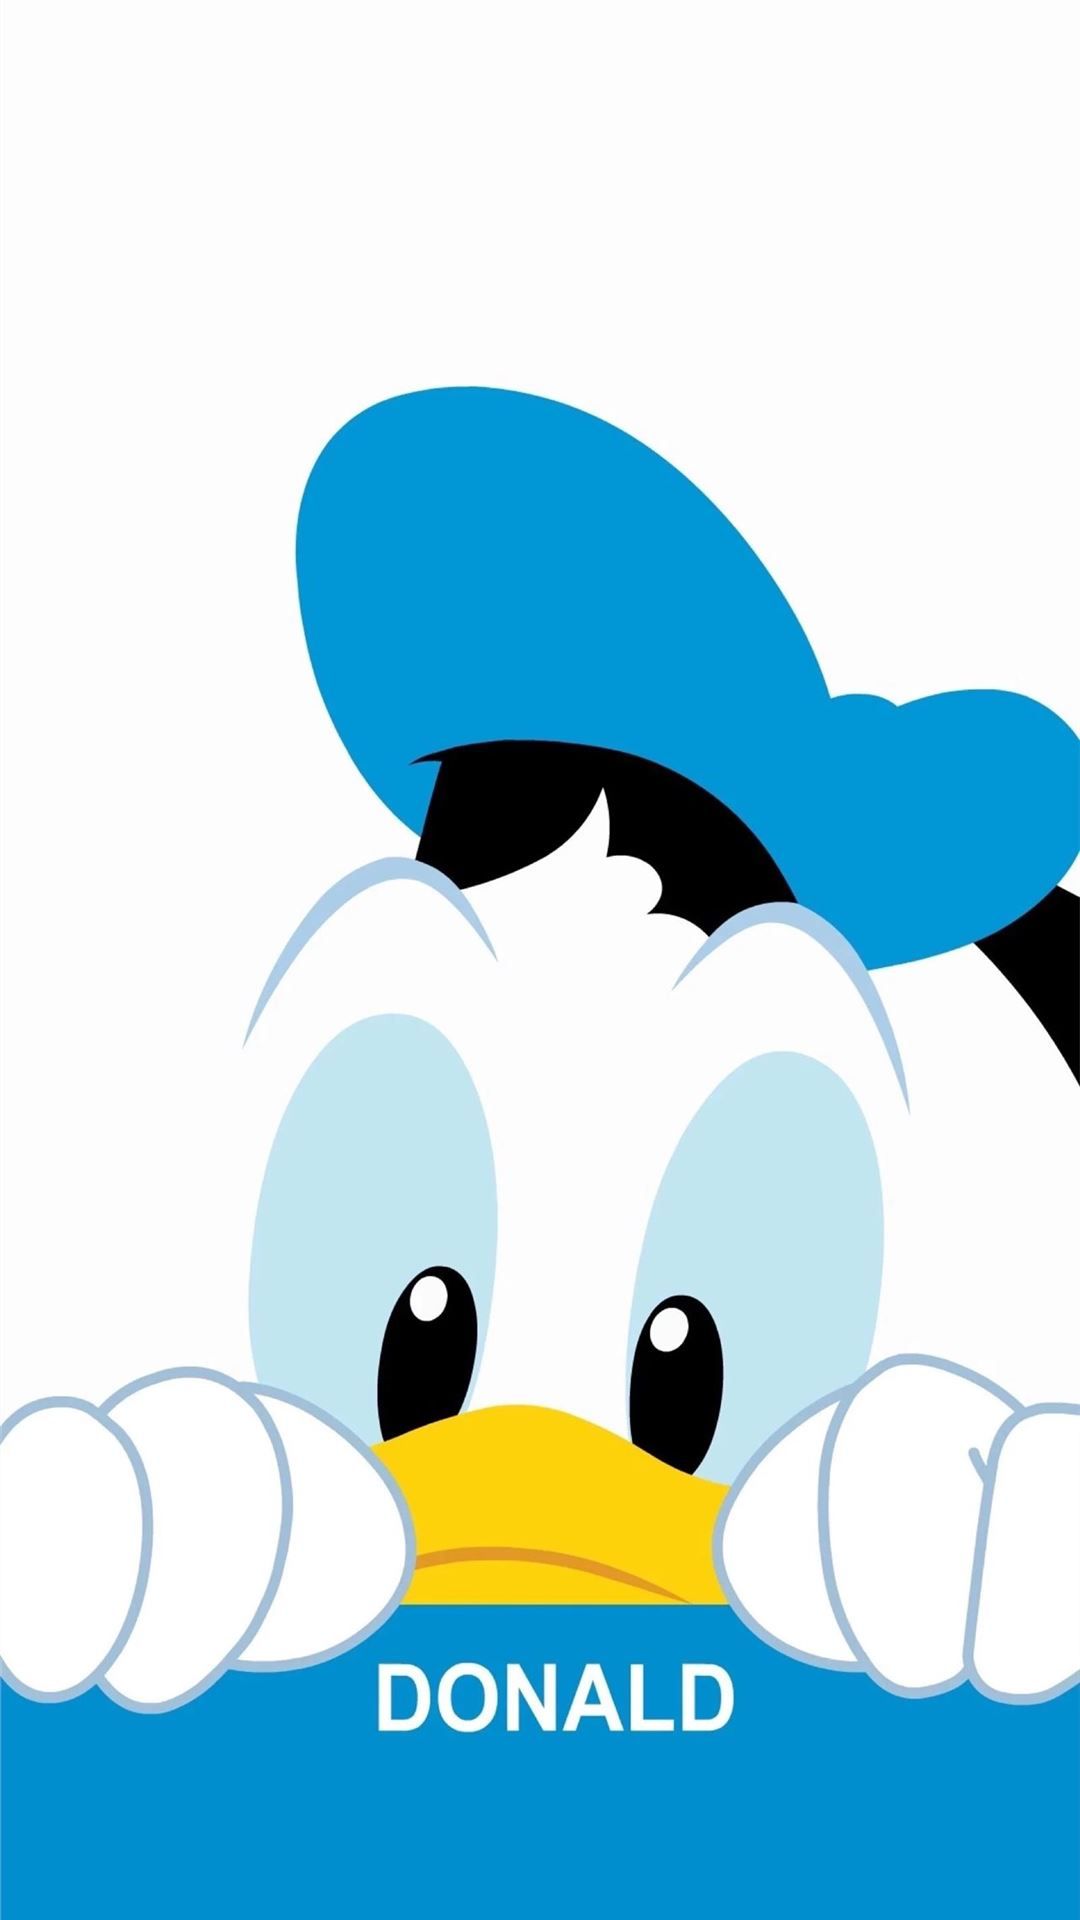 IPhone wallpaper donald duck with image resolution 1080x1920 pixel. You can make this wallpaper for your iPhone 5, 6, 7, 8, X backgrounds, Mobile Screensaver, or iPad Lock Screen - Duck